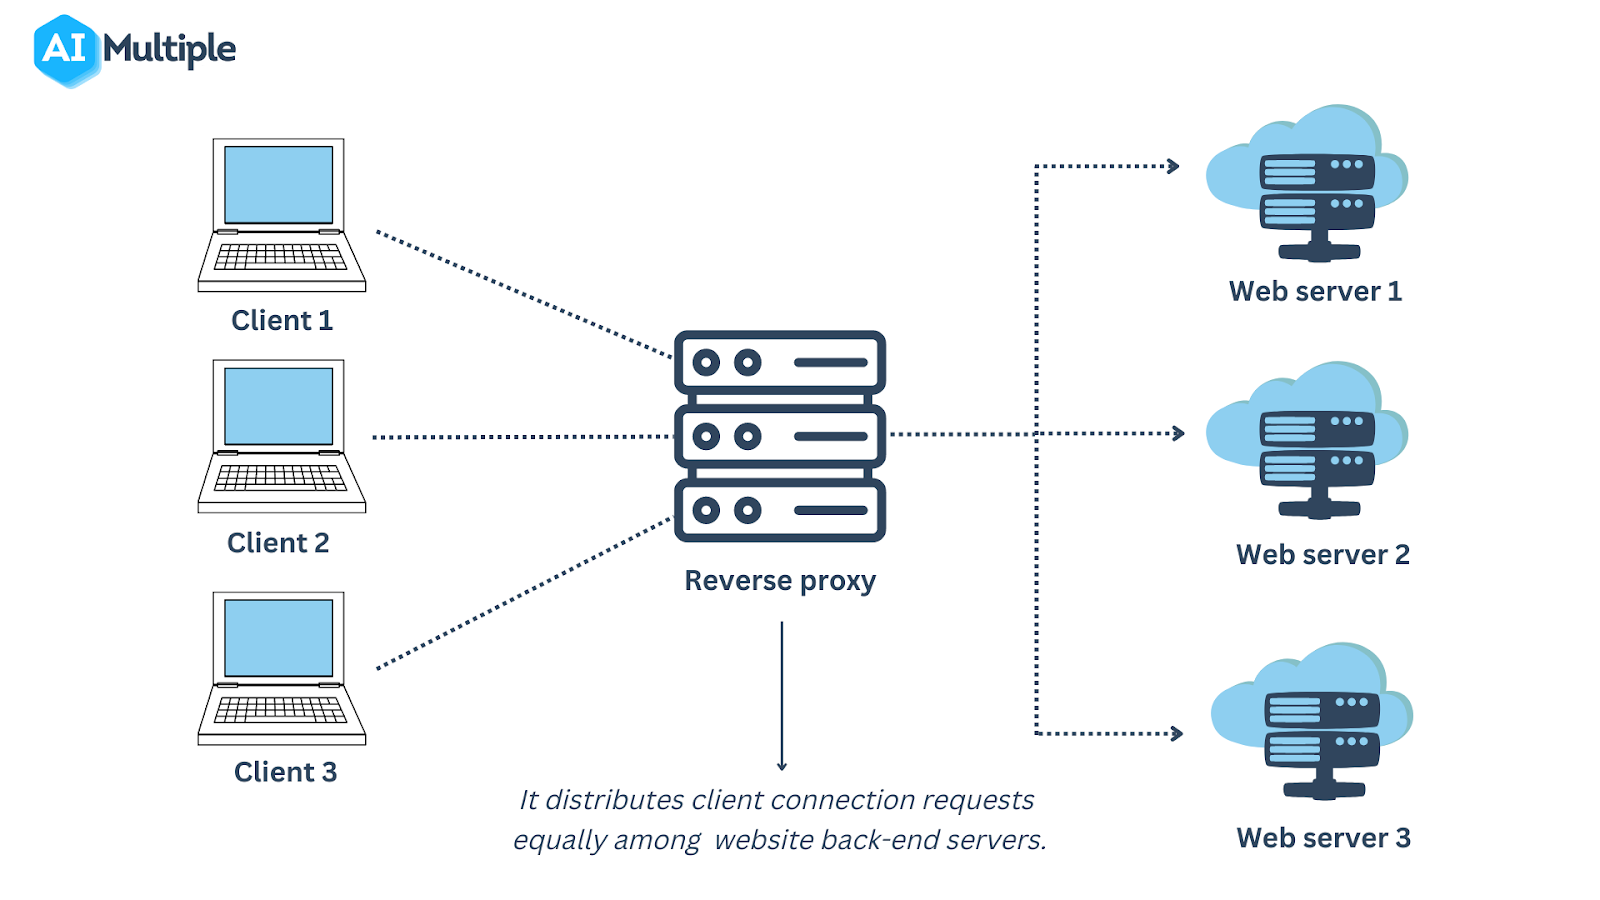 A reverse proxy helps to balance high volume of incoming clients requests among the target website's back-end servers. 